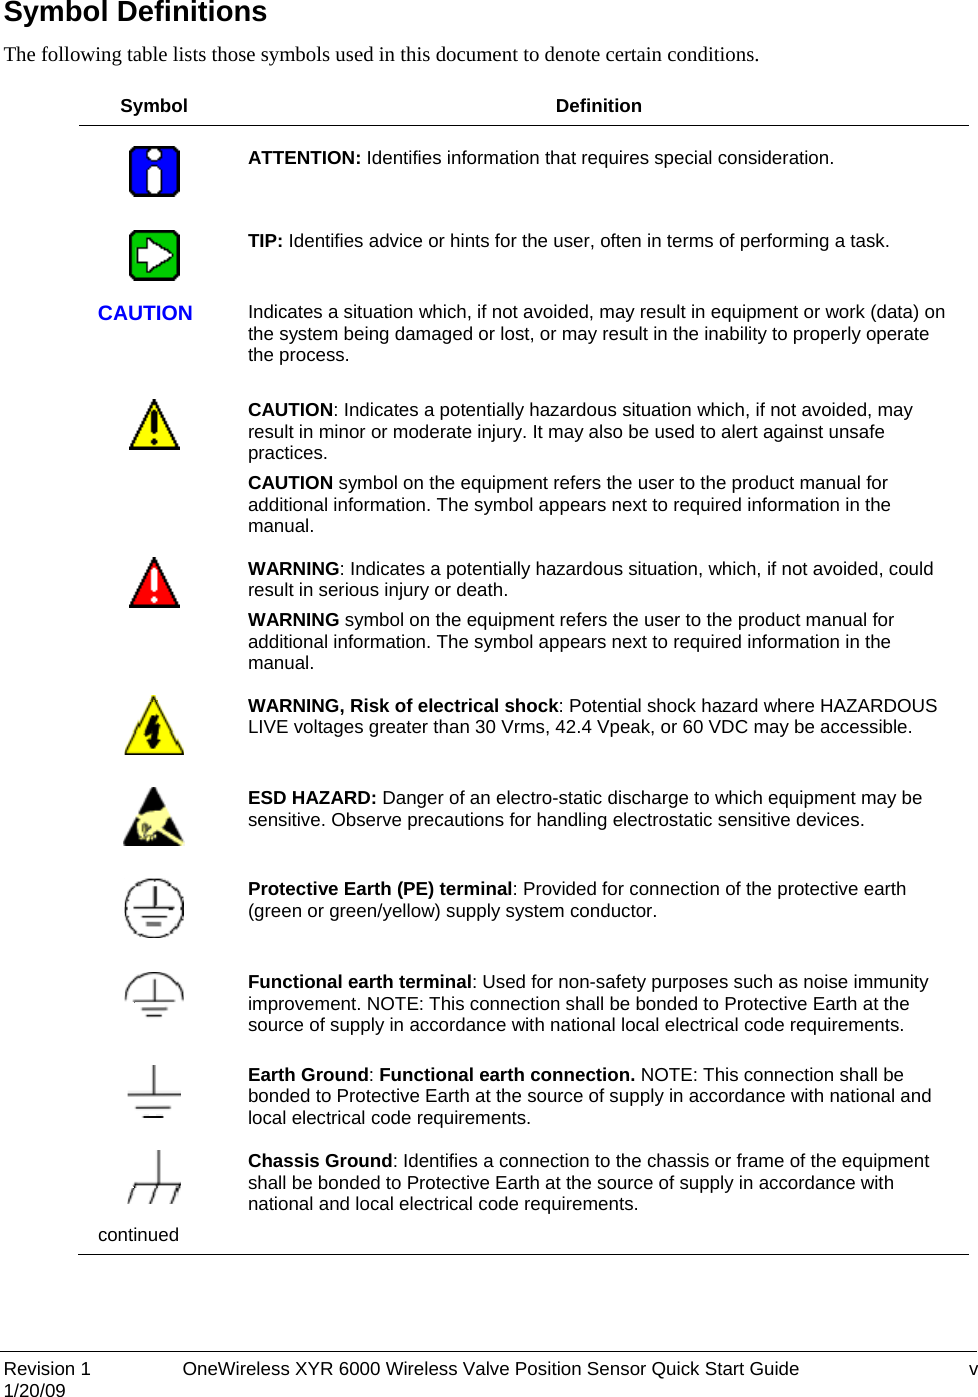  Symbol Definitions The following table lists those symbols used in this document to denote certain conditions.  Symbol Definition     ATTENTION: Identifies information that requires special consideration.     TIP: Identifies advice or hints for the user, often in terms of performing a task.   CAUTION  Indicates a situation which, if not avoided, may result in equipment or work (data) on the system being damaged or lost, or may result in the inability to properly operate the process.      CAUTION: Indicates a potentially hazardous situation which, if not avoided, may result in minor or moderate injury. It may also be used to alert against unsafe practices.  CAUTION symbol on the equipment refers the user to the product manual for additional information. The symbol appears next to required information in the manual.     WARNING: Indicates a potentially hazardous situation, which, if not avoided, could result in serious injury or death. WARNING symbol on the equipment refers the user to the product manual for additional information. The symbol appears next to required information in the manual.      WARNING, Risk of electrical shock: Potential shock hazard where HAZARDOUS LIVE voltages greater than 30 Vrms, 42.4 Vpeak, or 60 VDC may be accessible.     ESD HAZARD: Danger of an electro-static discharge to which equipment may be sensitive. Observe precautions for handling electrostatic sensitive devices.     Protective Earth (PE) terminal: Provided for connection of the protective earth (green or green/yellow) supply system conductor.     Functional earth terminal: Used for non-safety purposes such as noise immunity improvement. NOTE: This connection shall be bonded to Protective Earth at the source of supply in accordance with national local electrical code requirements.     Earth Ground: Functional earth connection. NOTE: This connection shall be bonded to Protective Earth at the source of supply in accordance with national and local electrical code requirements.    Chassis Ground: Identifies a connection to the chassis or frame of the equipment shall be bonded to Protective Earth at the source of supply in accordance with national and local electrical code requirements. continued  Revision 1  OneWireless XYR 6000 Wireless Valve Position Sensor Quick Start Guide  v 1/20/09  